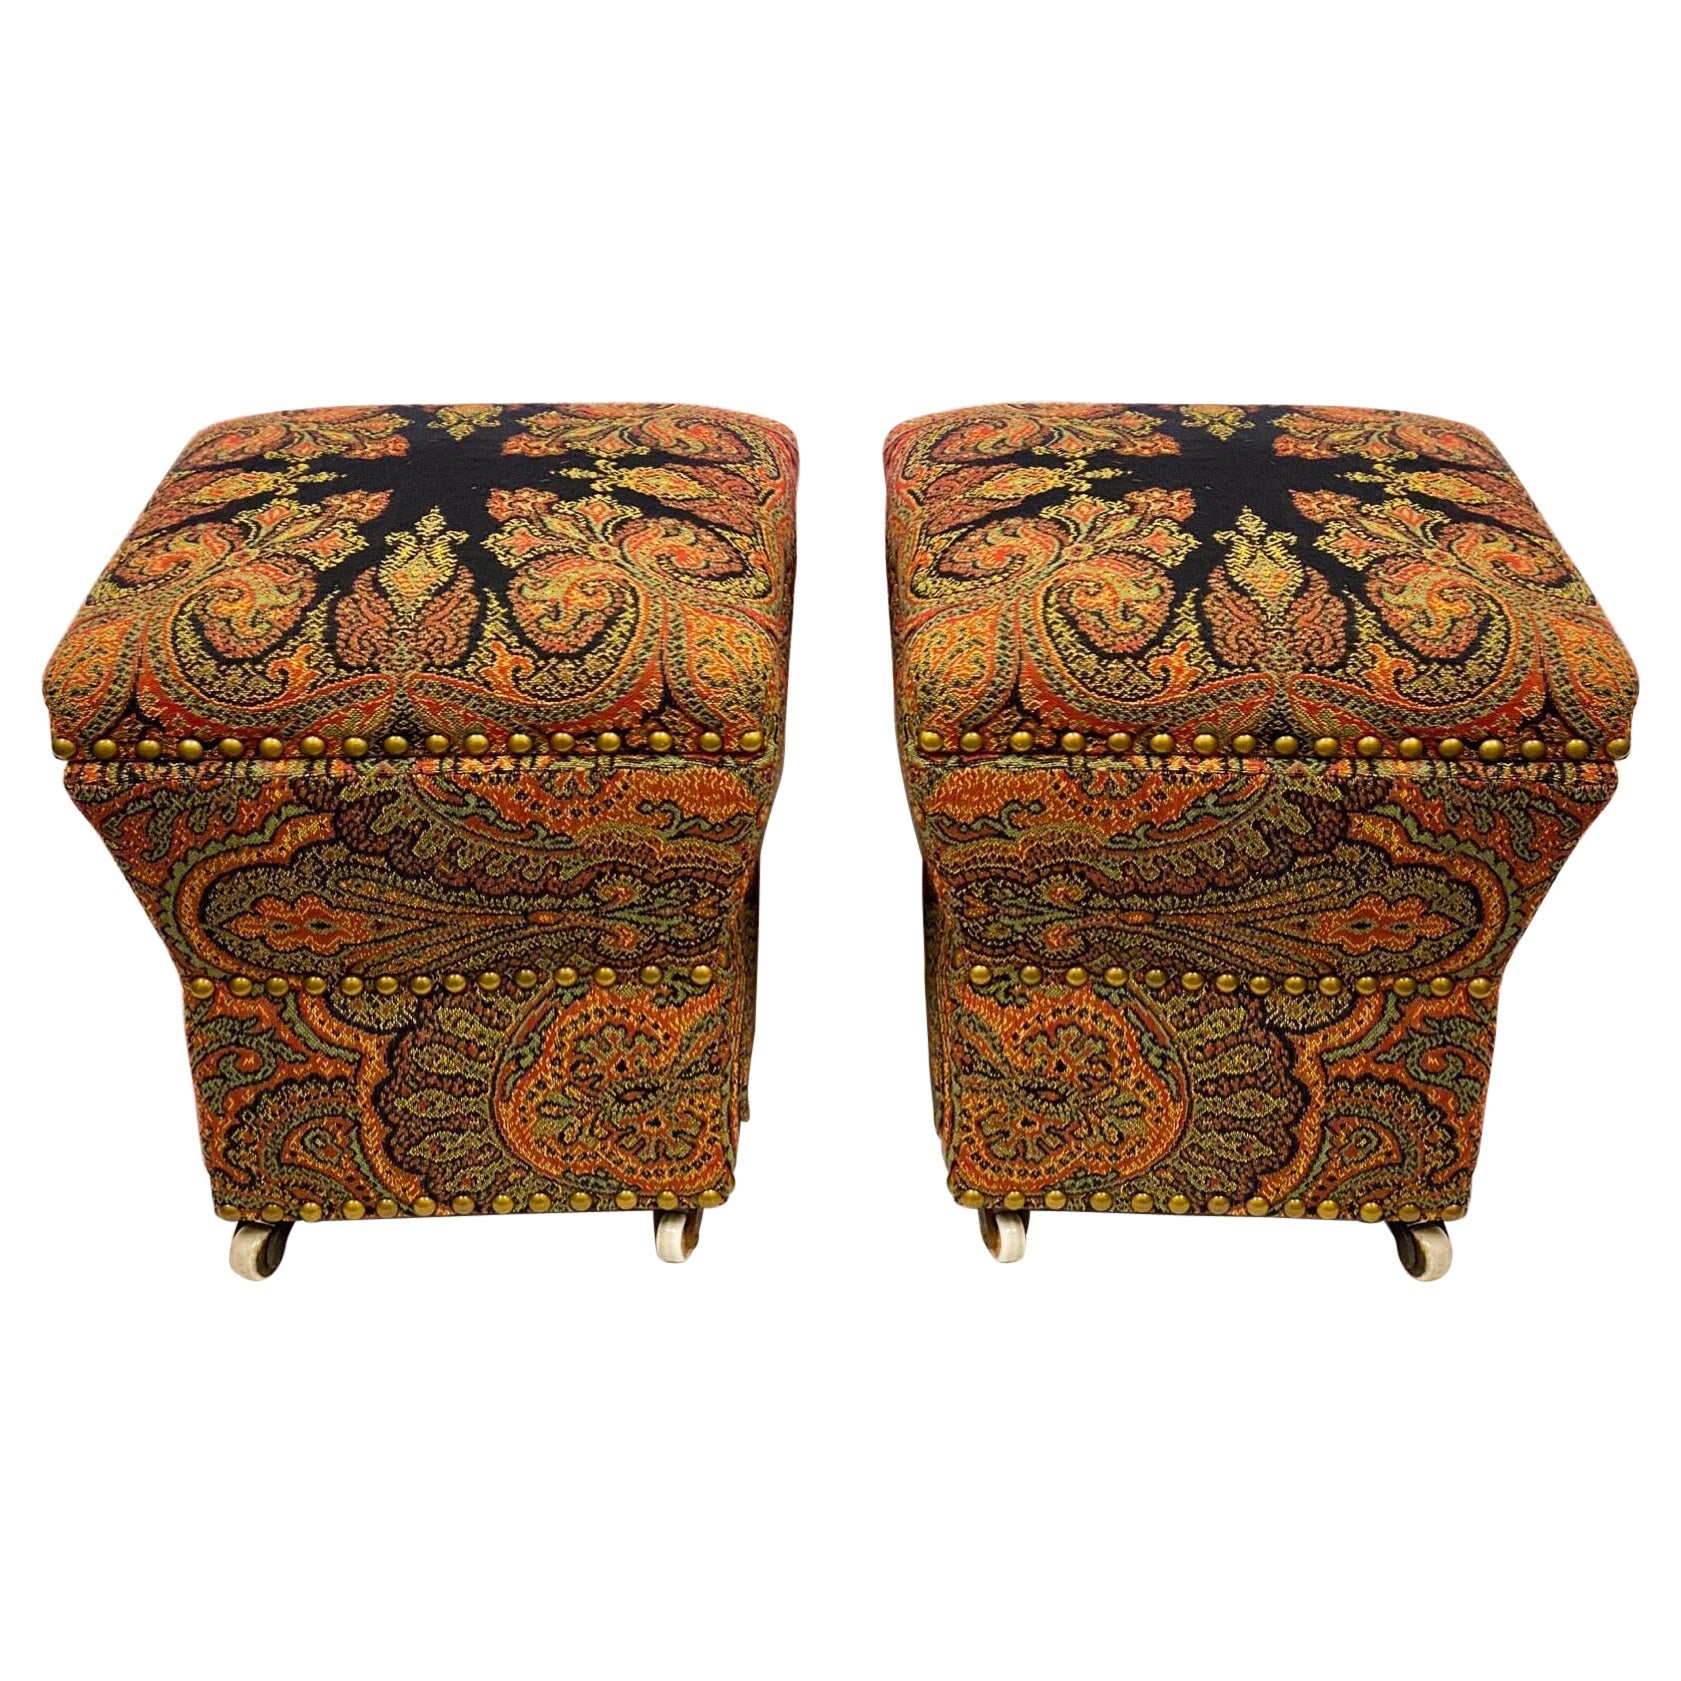 English Paisley Upholstered Storage Ottomans, a Pair